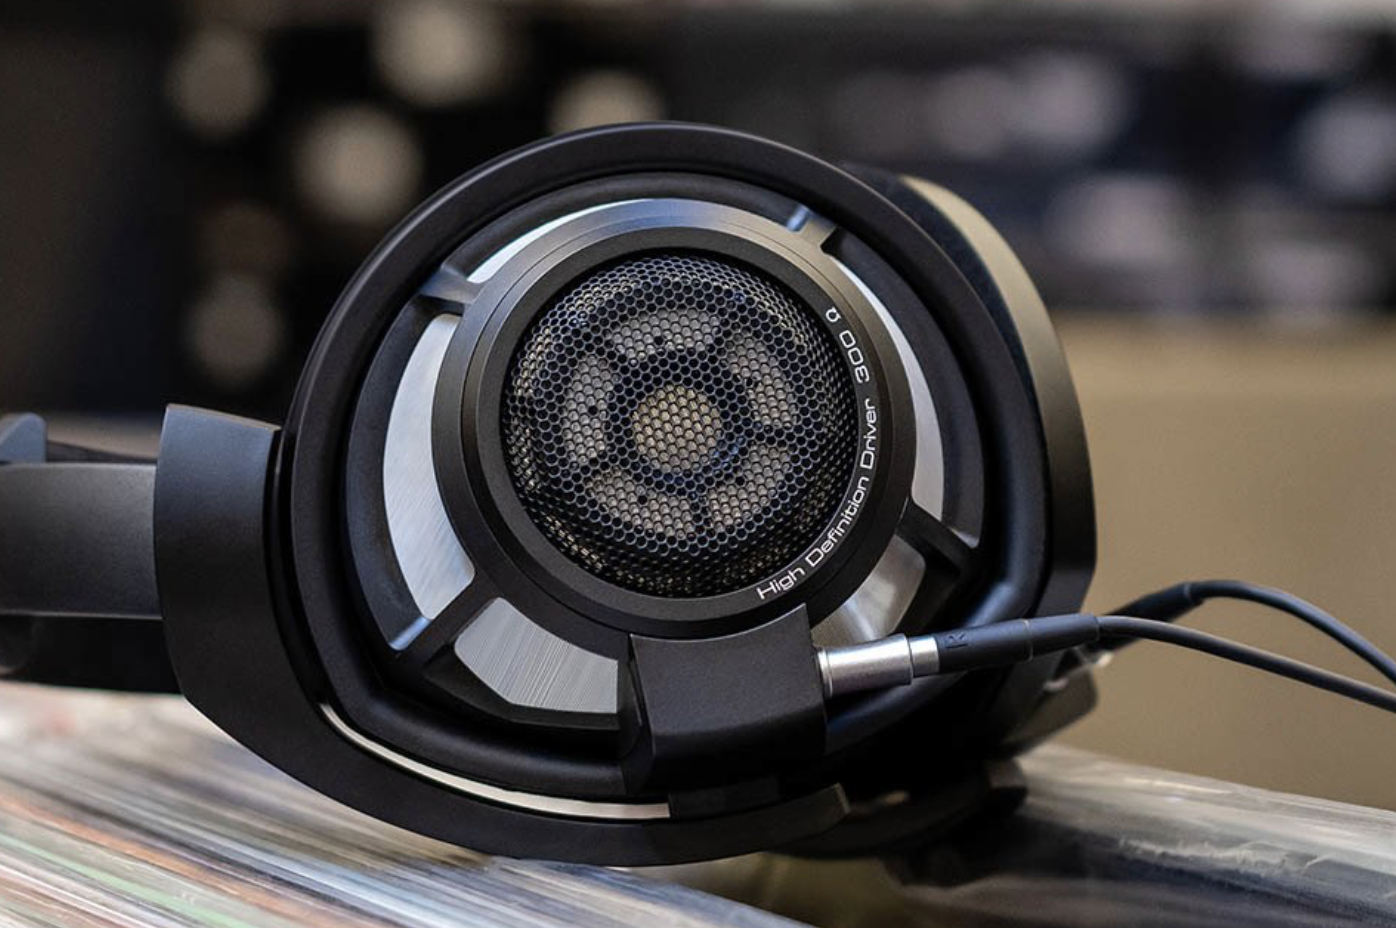 Best gaming headset 2023 - the cream of the audio crop